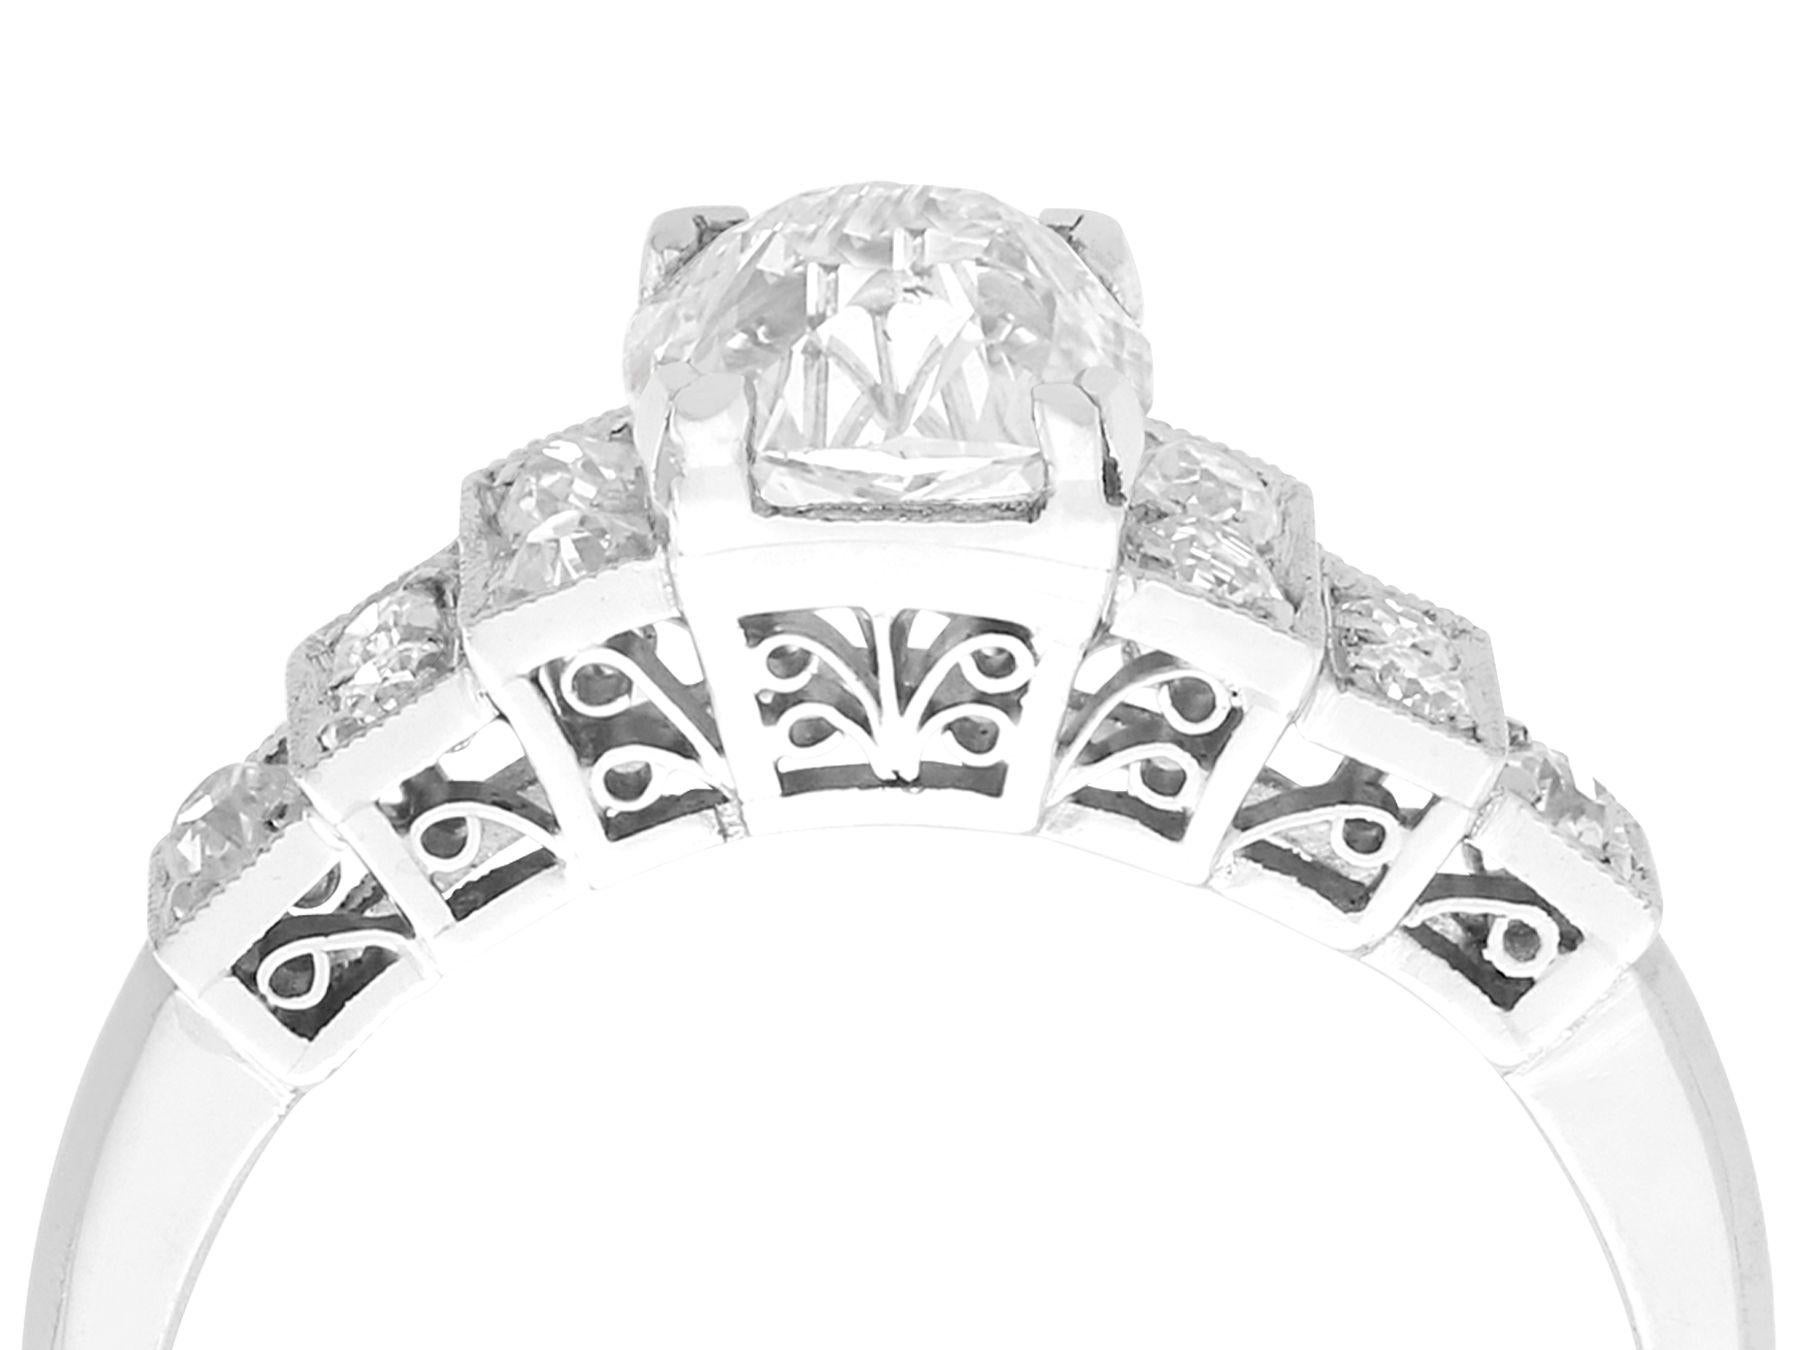 A stunning antique 1.33 carat diamond and vintage platinum dress ring; part of our diverse diamond jewelry and estate jewelry collections

This stunning, fine and impressive 1.33 carat diamond ring has been crafted in platinum.

The vintage 1950s